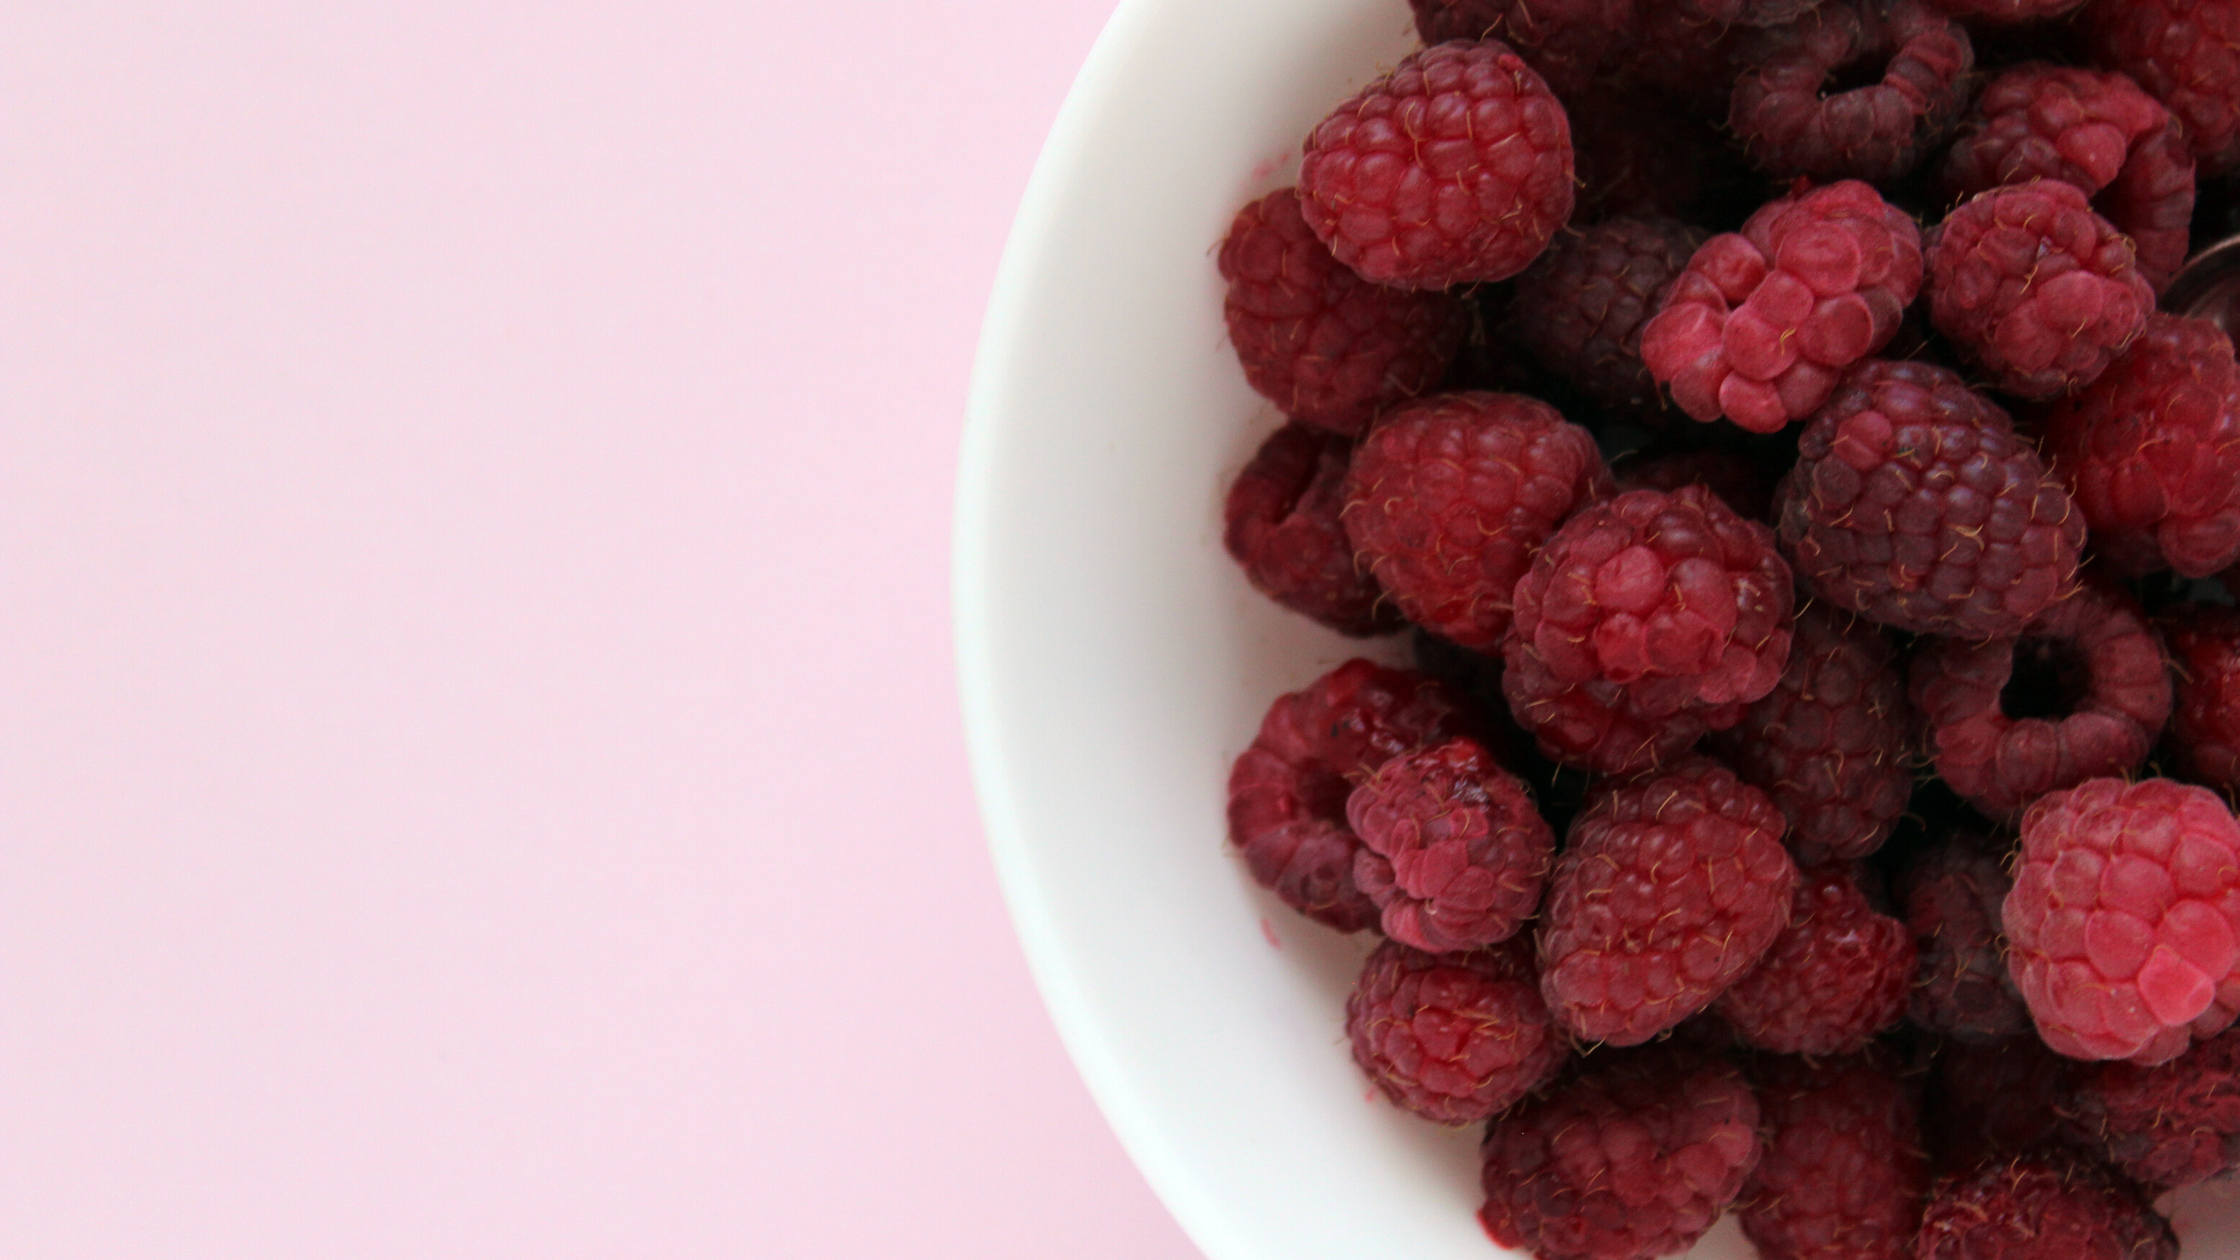 Antioxidants: What’s the Hype About?